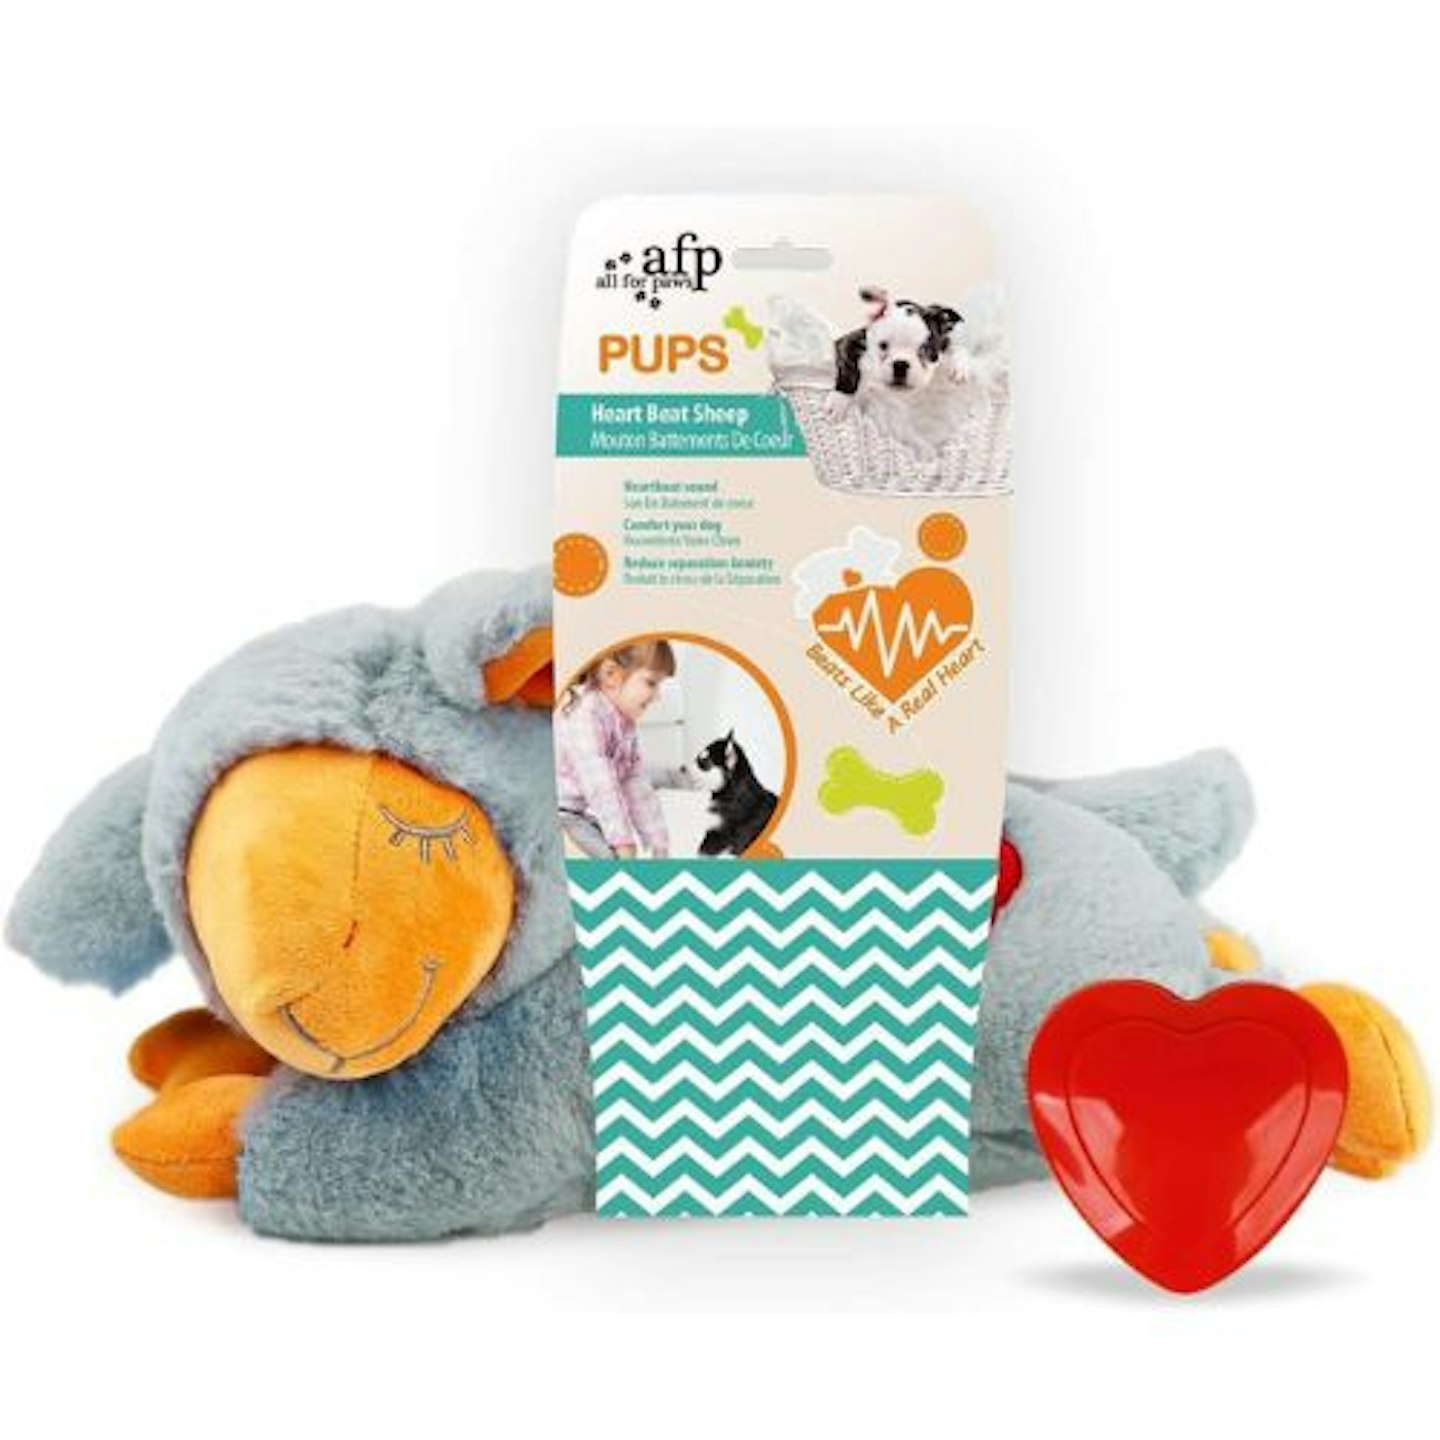 All For Paws Little Buddy Heart Beat Sheep Puppy Toy